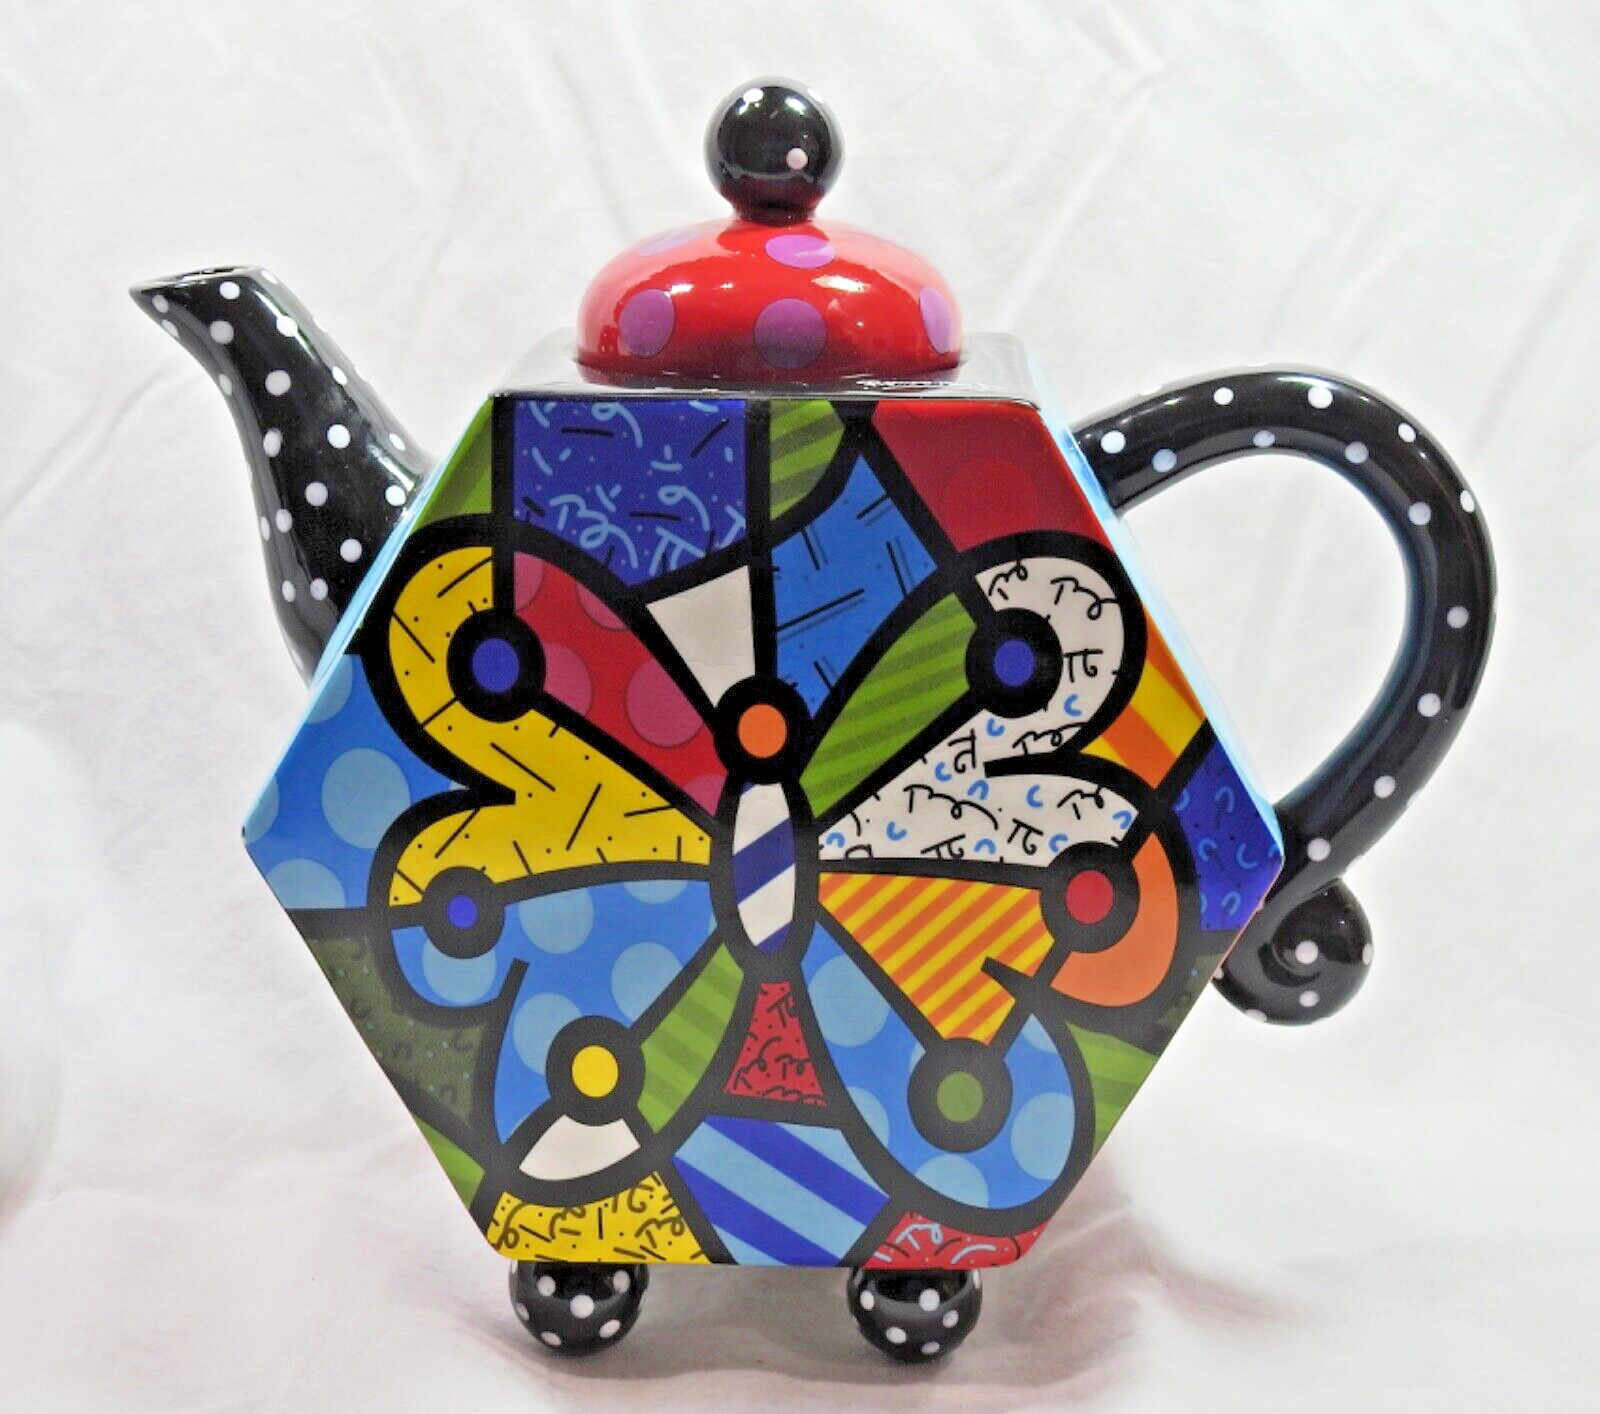 2009 ROMERO BRITTO GiftCraft Butterfly Polka Dot Teapot Retired #14072